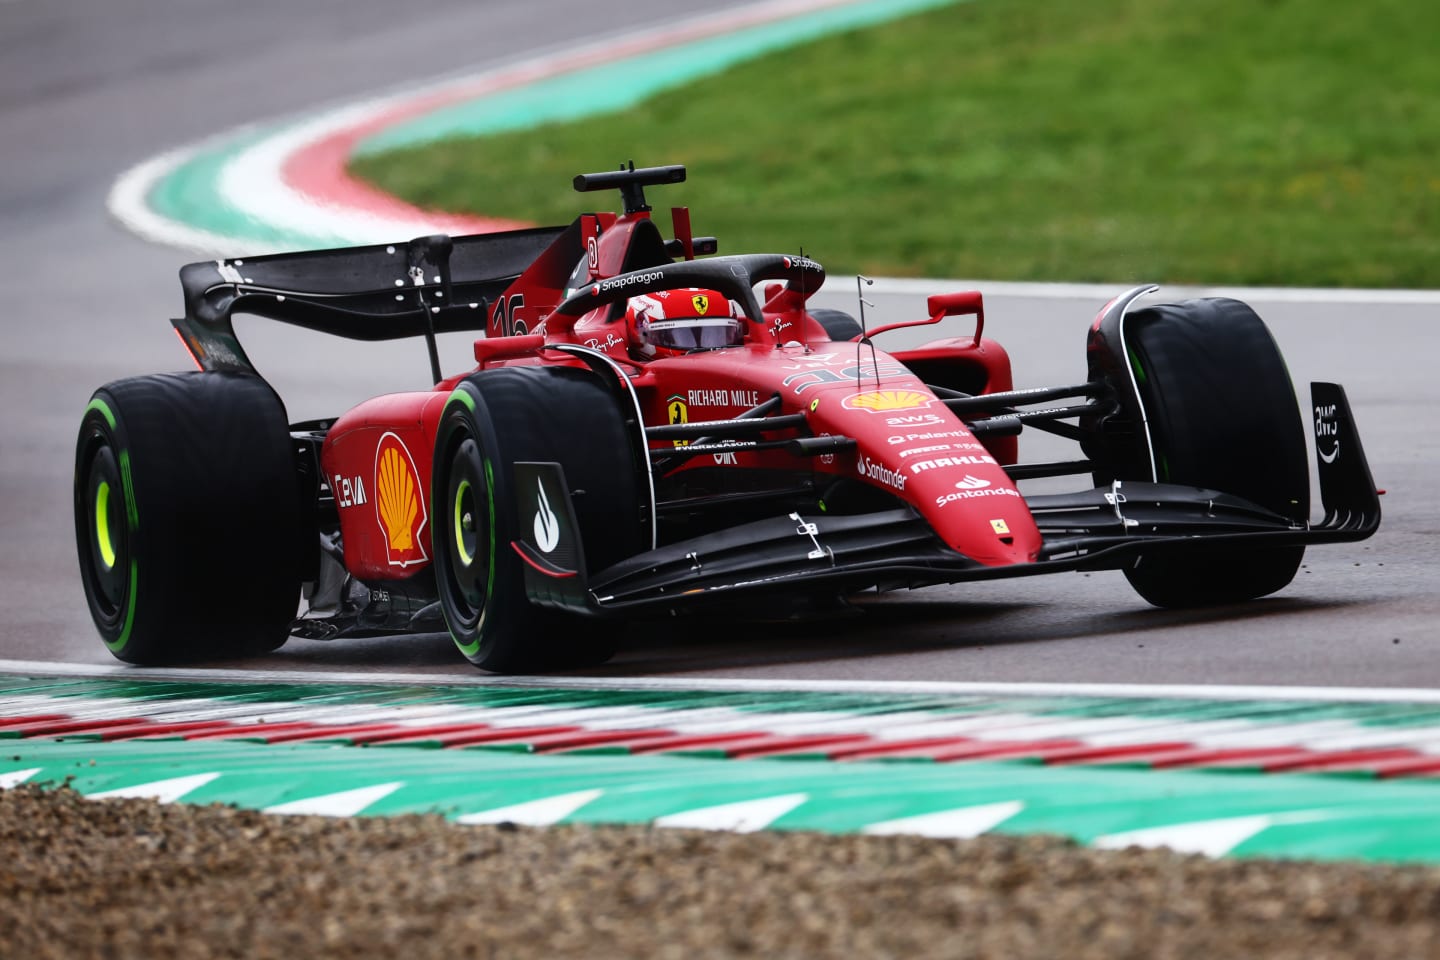 IMOLA, ITALY - APRIL 22: Charles Leclerc of Monaco driving (16) the Ferrari F1-75 on track during qualifying ahead of the F1 Grand Prix of Emilia Romagna at Autodromo Enzo e Dino Ferrari on April 22, 2022 in Imola, Italy. (Photo by Mark Thompson/Getty Images)